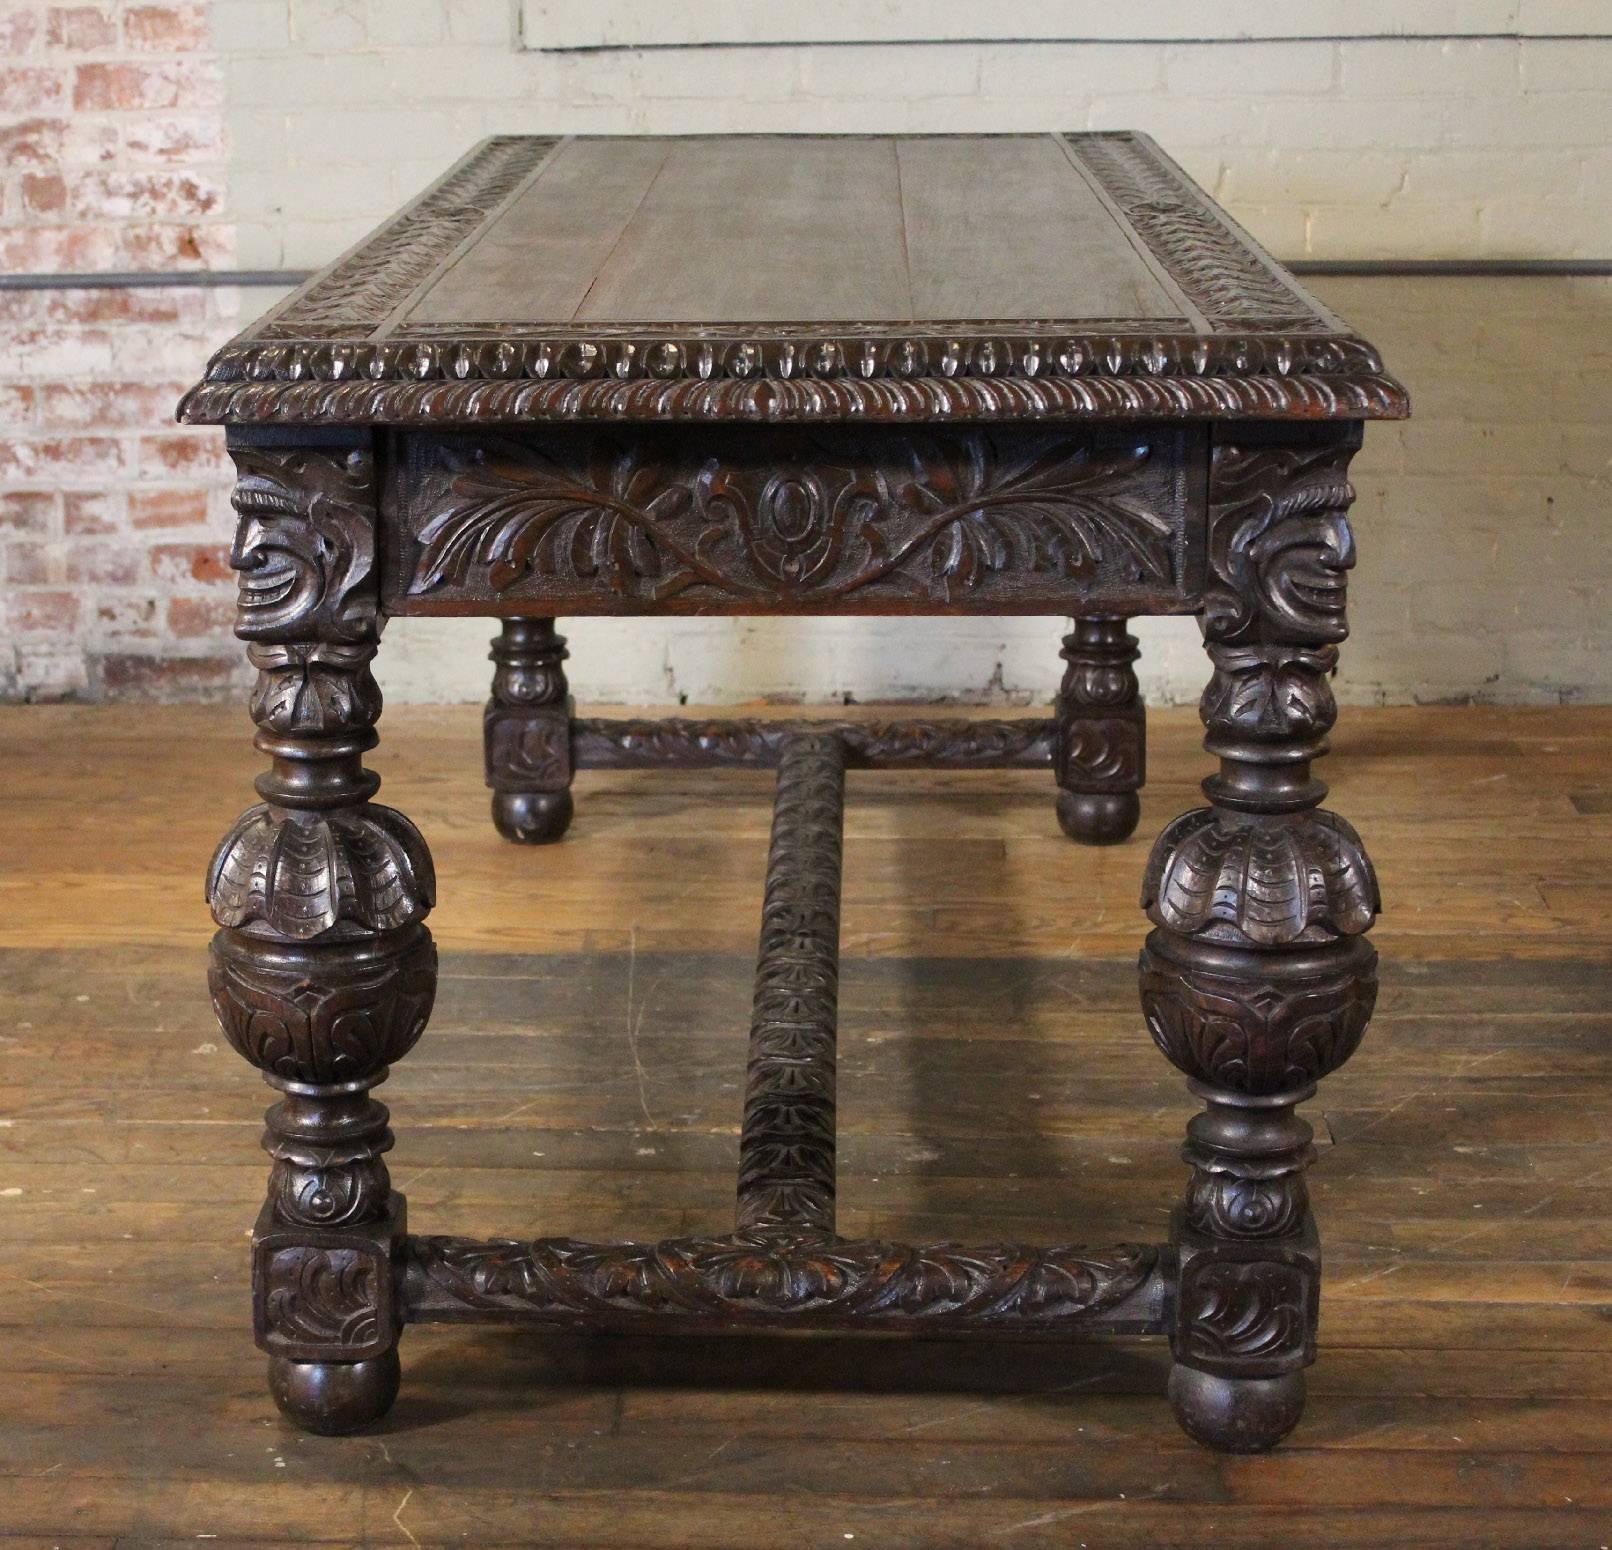 Hand-carved 19th century English oak library table / writing desk with two drawers. Measures 69 1/8